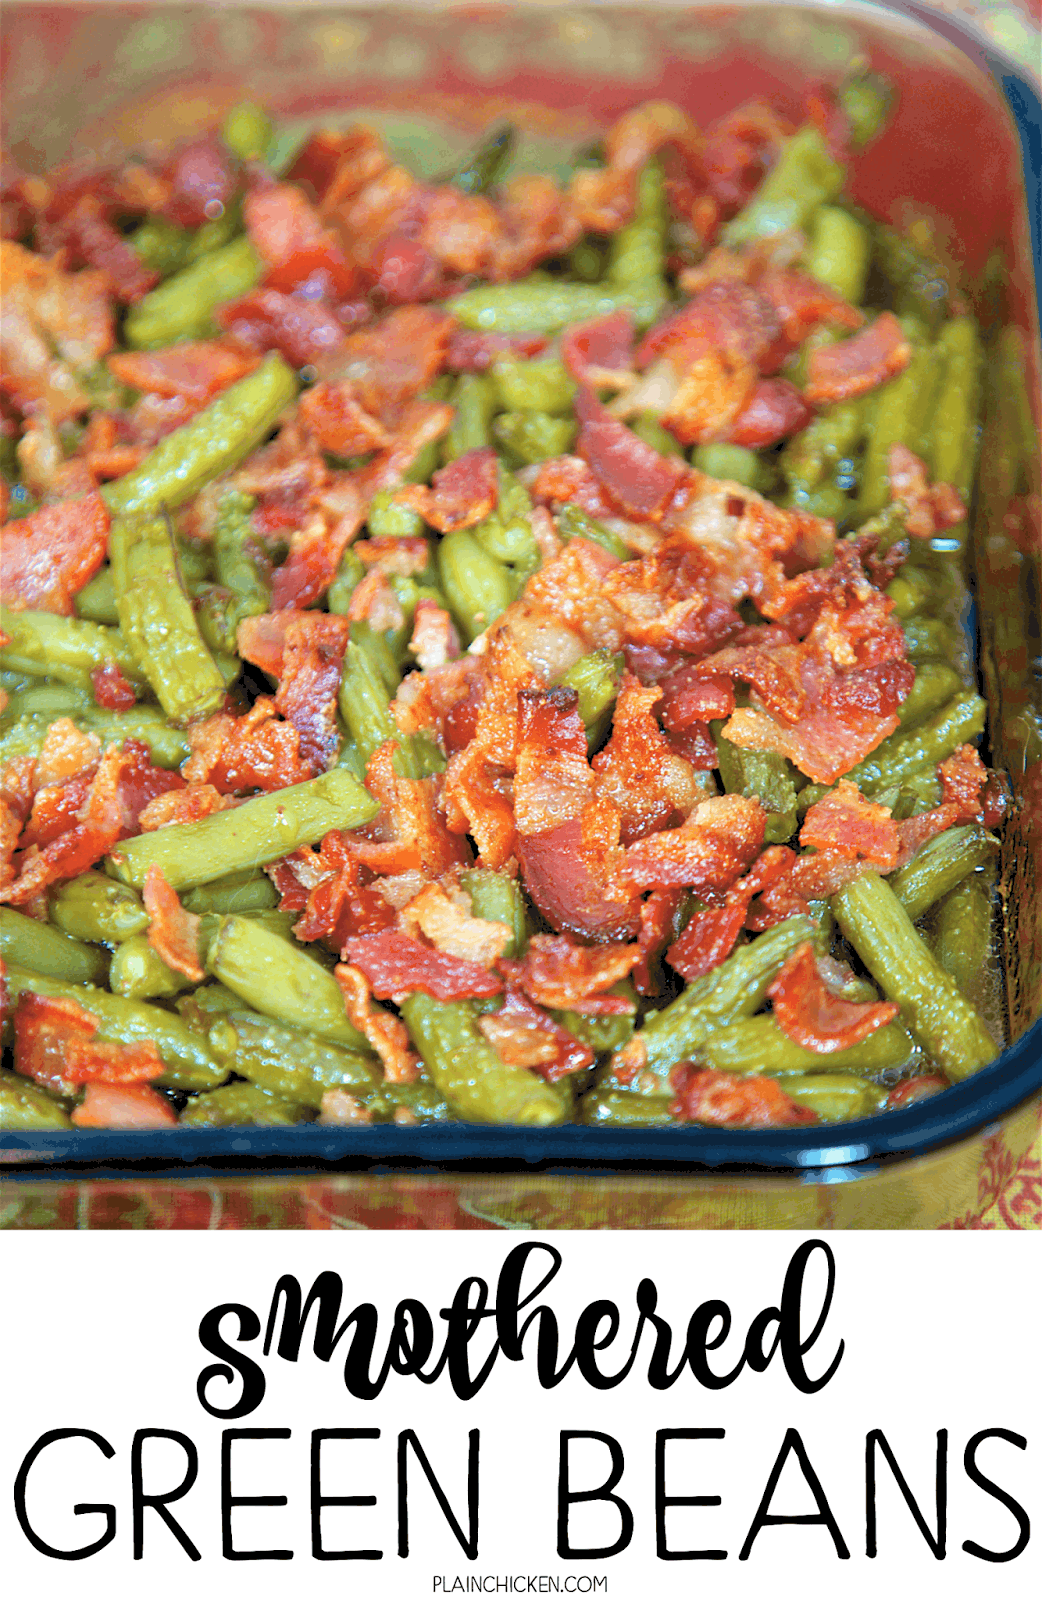 Smothered Green Beans - canned green beans baked in bacon, brown sugar, butter, soy sauce and garlic. This is the most requested green bean recipe in our house.Everybody gets seconds. SO good!! Great for a potluck. Everyone asks for the recipe! Super easy to make.